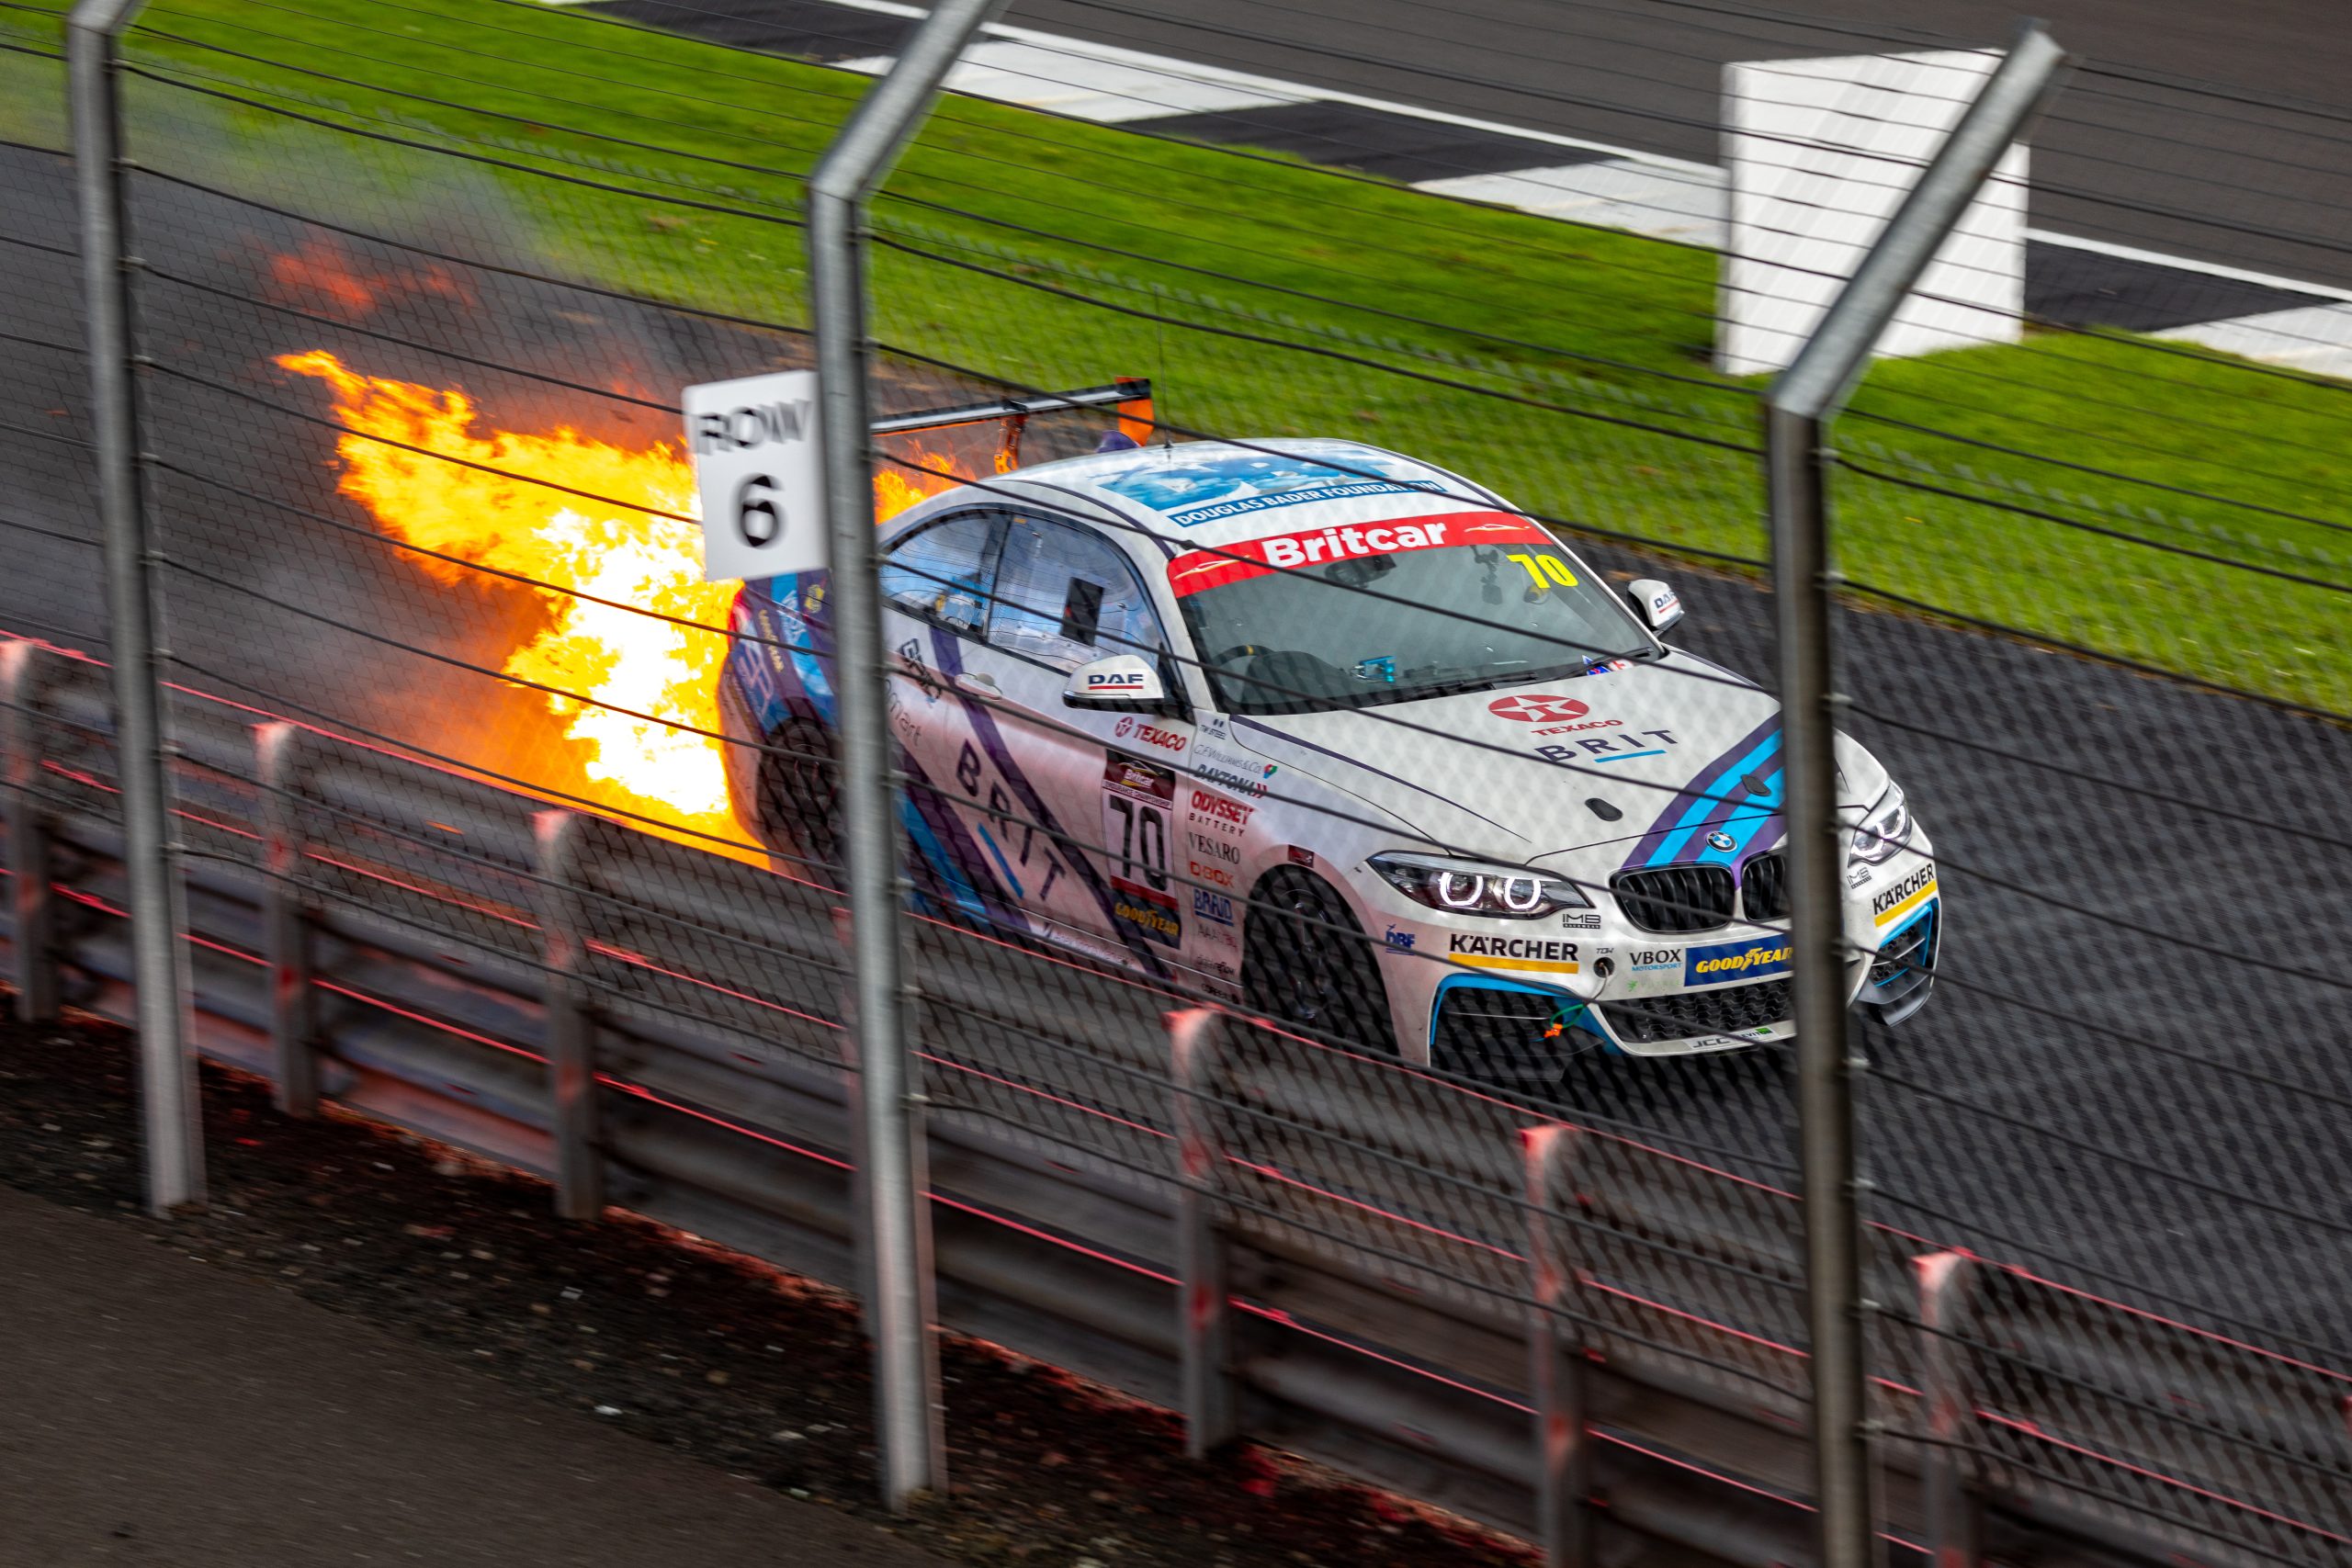 Team BRIT driver praised for quick actions in freak car fire